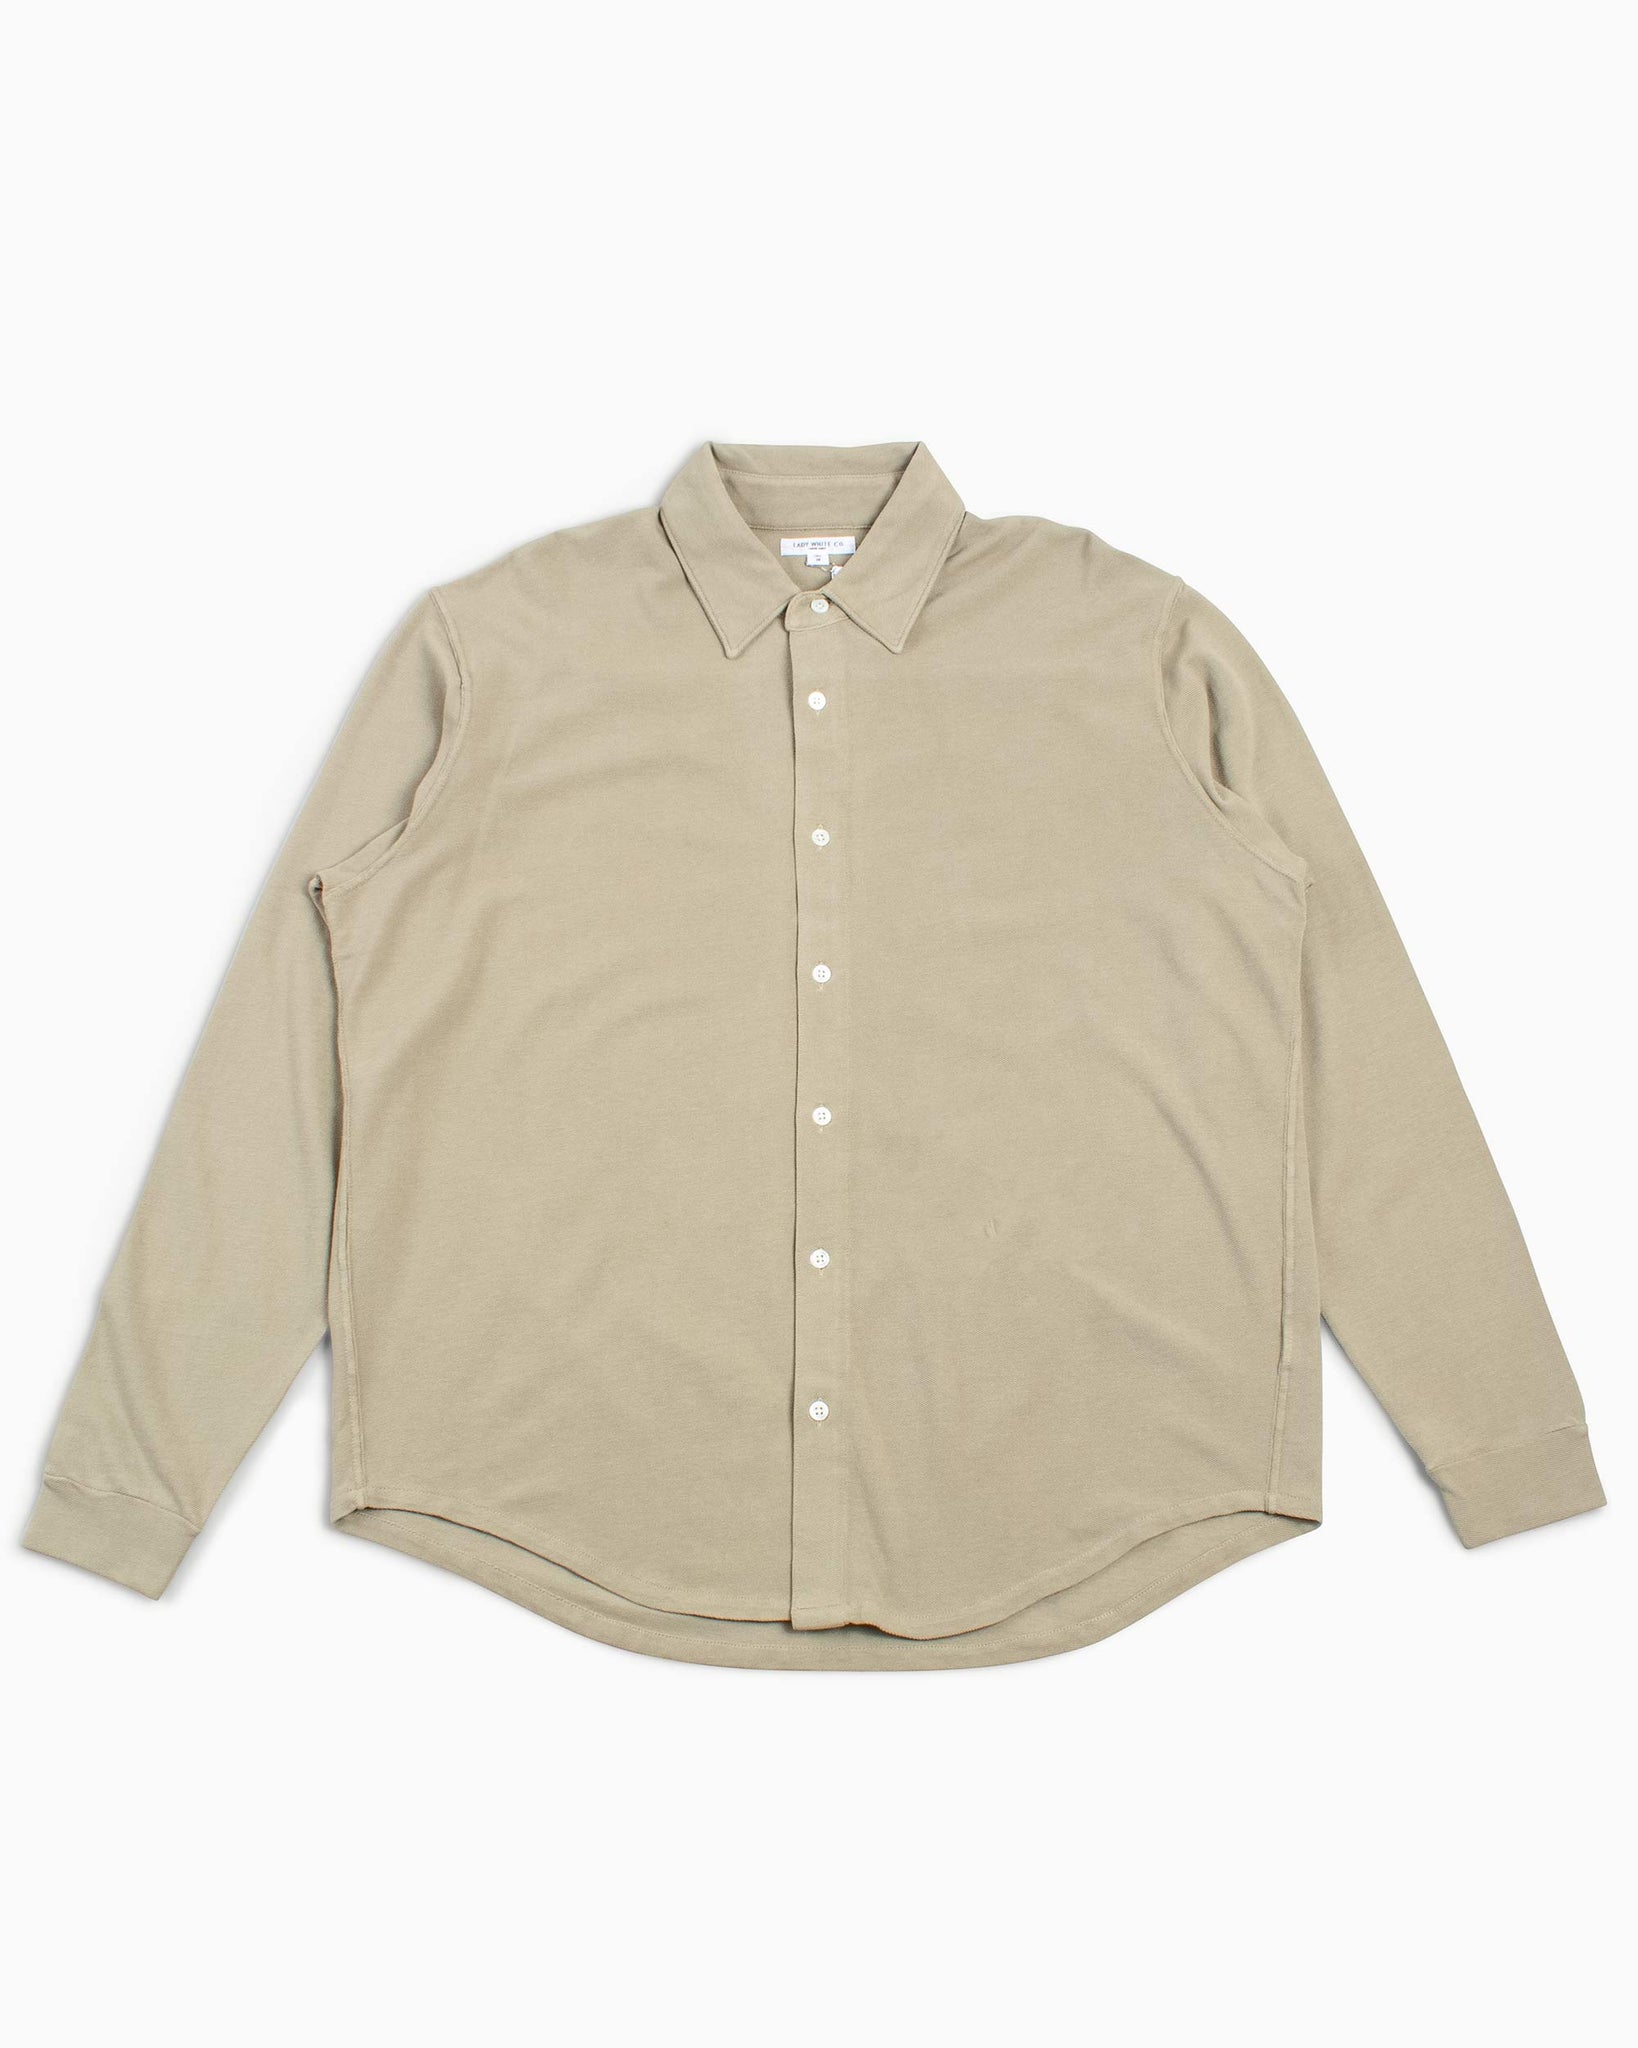 Lady White Co. L/S Pique Button Down Taupe Fog